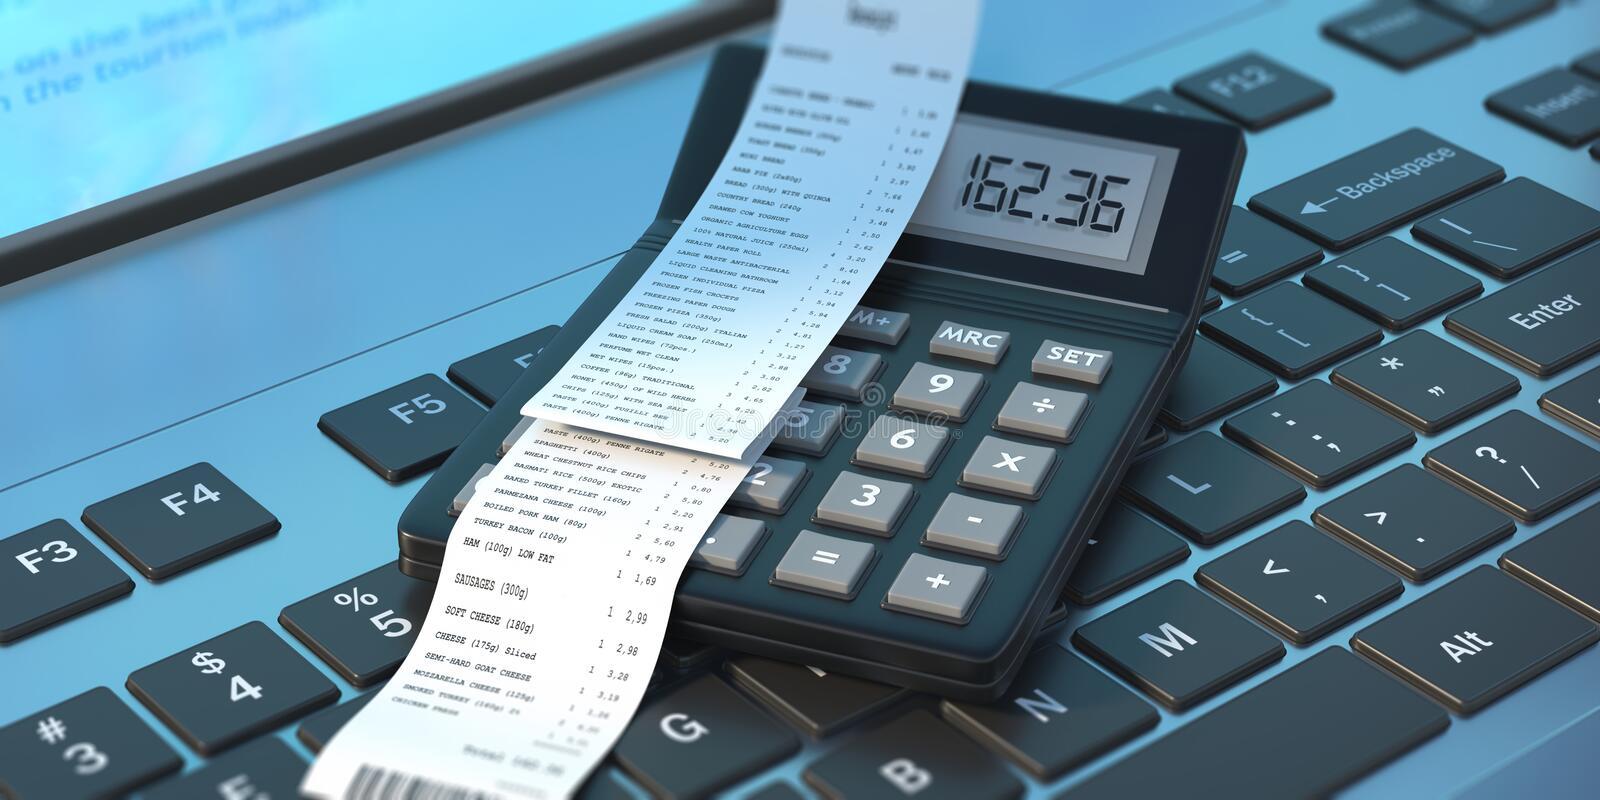 7 Reasons To Use Receipts For Your Business